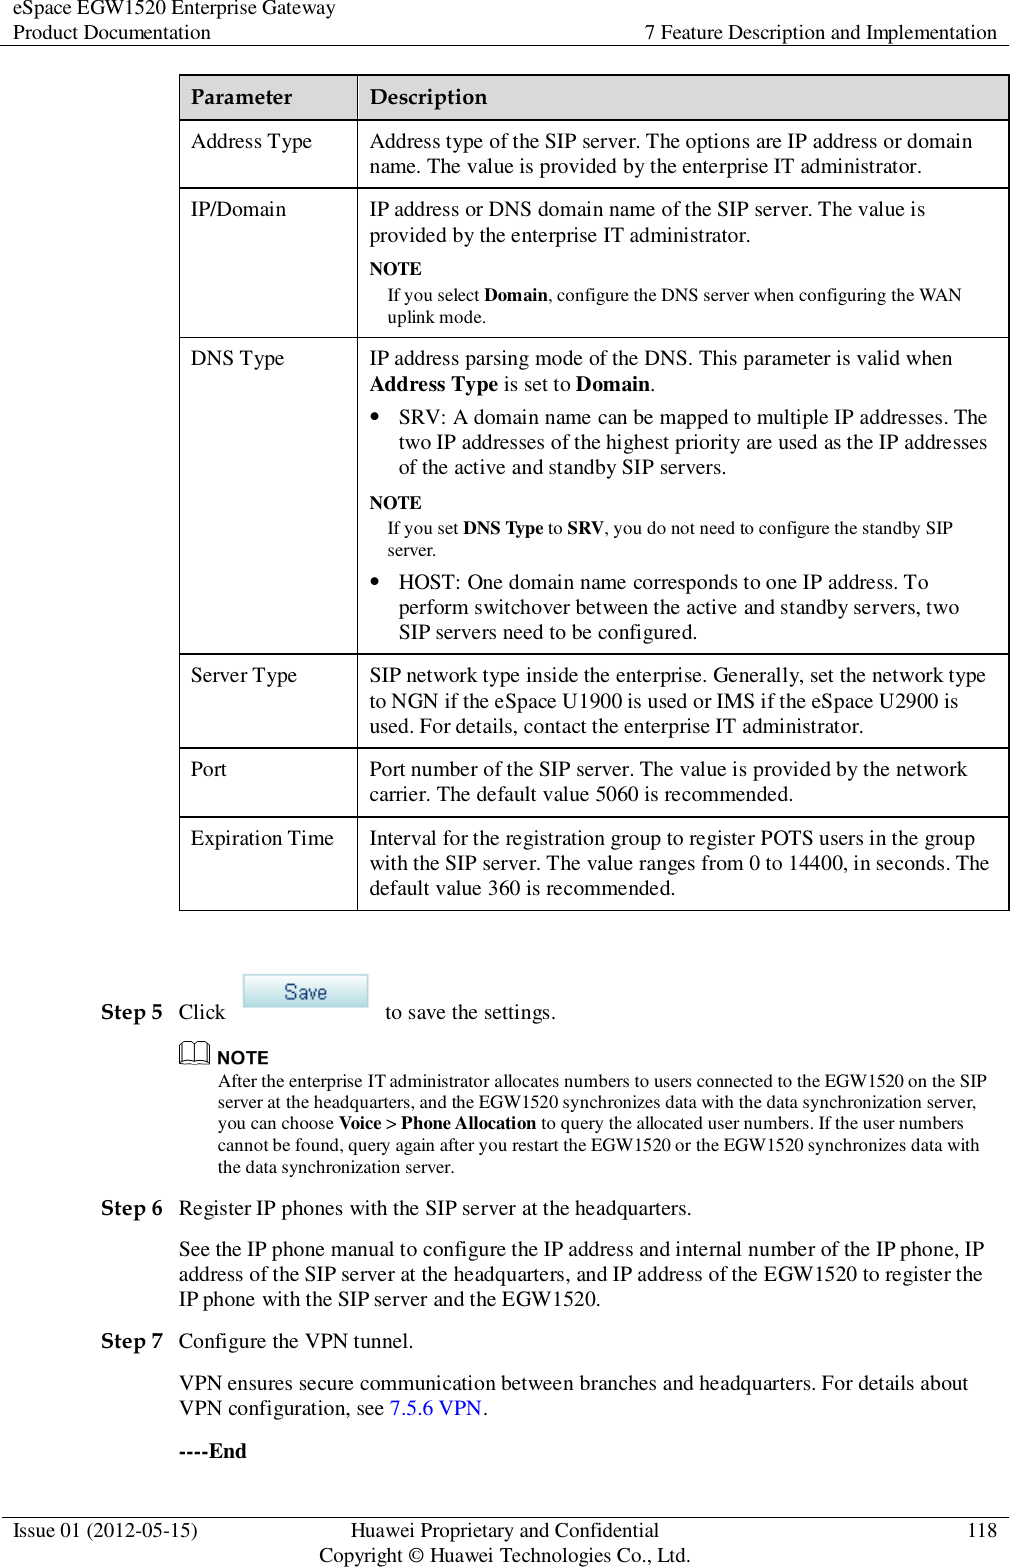 eSpace EGW1520 Enterprise Gateway Product Documentation 7 Feature Description and Implementation  Issue 01 (2012-05-15) Huawei Proprietary and Confidential                                     Copyright © Huawei Technologies Co., Ltd. 118  Parameter Description Address Type Address type of the SIP server. The options are IP address or domain name. The value is provided by the enterprise IT administrator. IP/Domain IP address or DNS domain name of the SIP server. The value is provided by the enterprise IT administrator. NOTE If you select Domain, configure the DNS server when configuring the WAN uplink mode. DNS Type IP address parsing mode of the DNS. This parameter is valid when Address Type is set to Domain.  SRV: A domain name can be mapped to multiple IP addresses. The two IP addresses of the highest priority are used as the IP addresses of the active and standby SIP servers.   NOTE If you set DNS Type to SRV, you do not need to configure the standby SIP server.  HOST: One domain name corresponds to one IP address. To perform switchover between the active and standby servers, two SIP servers need to be configured. Server Type SIP network type inside the enterprise. Generally, set the network type to NGN if the eSpace U1900 is used or IMS if the eSpace U2900 is used. For details, contact the enterprise IT administrator. Port Port number of the SIP server. The value is provided by the network carrier. The default value 5060 is recommended. Expiration Time Interval for the registration group to register POTS users in the group with the SIP server. The value ranges from 0 to 14400, in seconds. The default value 360 is recommended.  Step 5 Click    to save the settings.  After the enterprise IT administrator allocates numbers to users connected to the EGW1520 on the SIP server at the headquarters, and the EGW1520 synchronizes data with the data synchronization server, you can choose Voice &gt; Phone Allocation to query the allocated user numbers. If the user numbers cannot be found, query again after you restart the EGW1520 or the EGW1520 synchronizes data with the data synchronization server. Step 6 Register IP phones with the SIP server at the headquarters. See the IP phone manual to configure the IP address and internal number of the IP phone, IP address of the SIP server at the headquarters, and IP address of the EGW1520 to register the IP phone with the SIP server and the EGW1520. Step 7 Configure the VPN tunnel. VPN ensures secure communication between branches and headquarters. For details about VPN configuration, see 7.5.6 VPN. ----End 